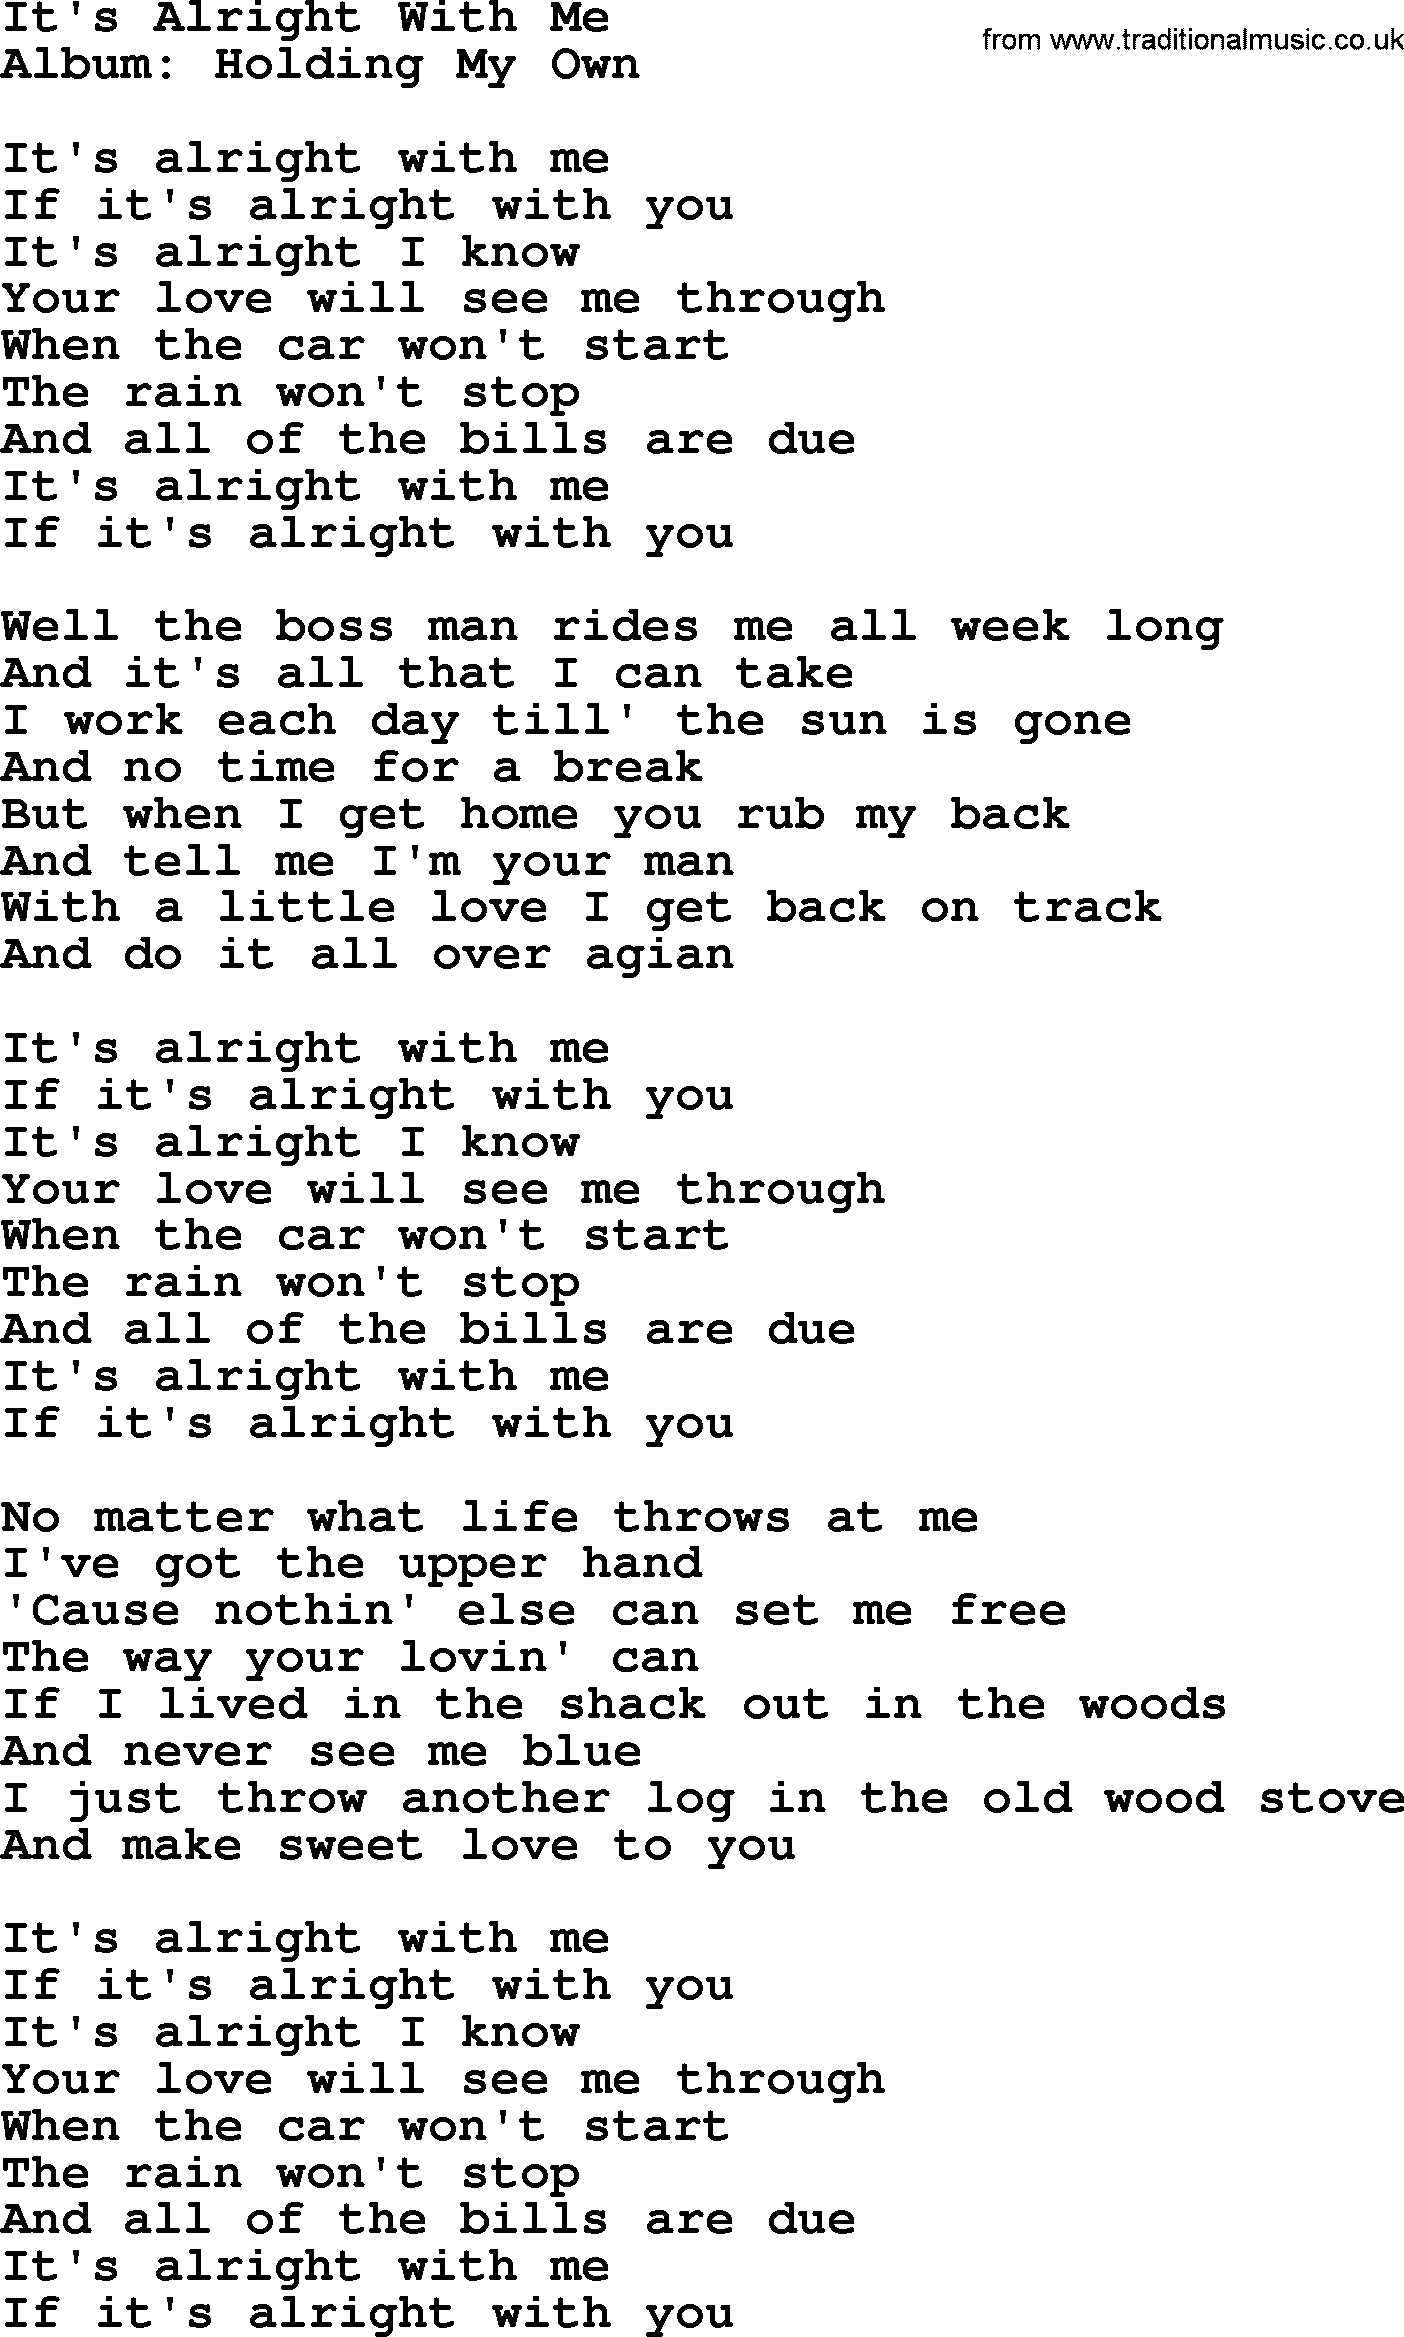 George Strait song: It's Alright With Me, lyrics